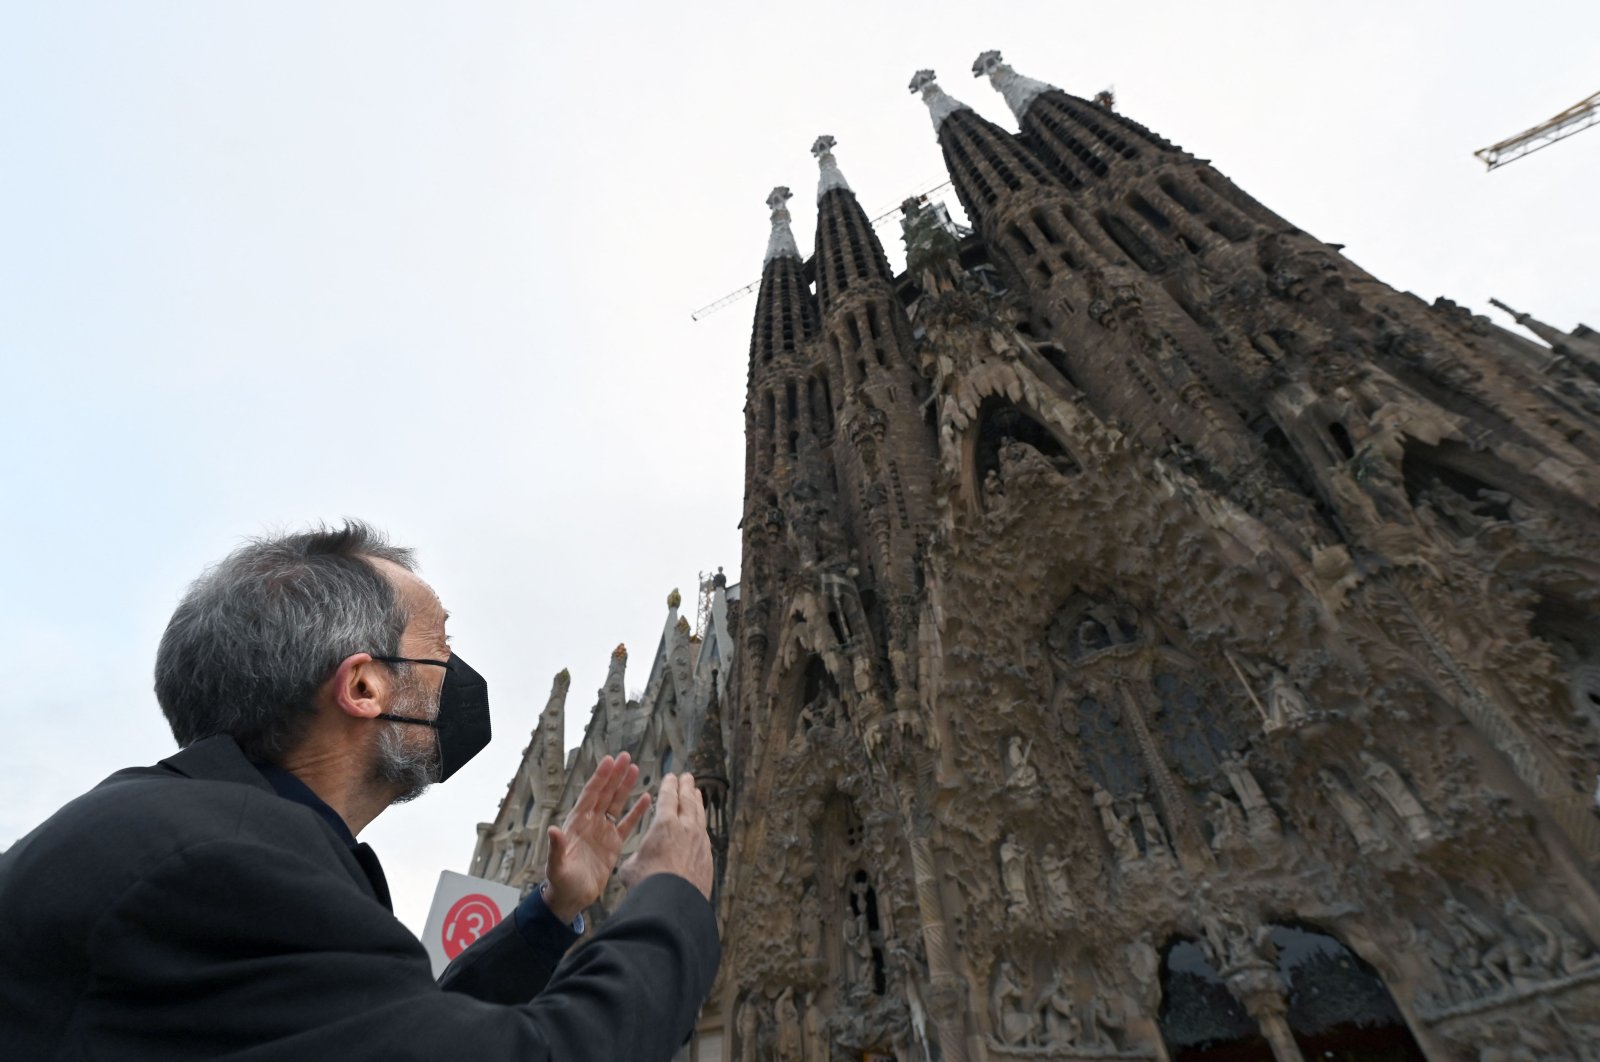 The architect director of the works of the Sagrada Familia basilica, Jordi Fauli, poses outside the catholic temple during an interview with AFP in Barcelona on Dec. 1, 2021. (AFP Photo)